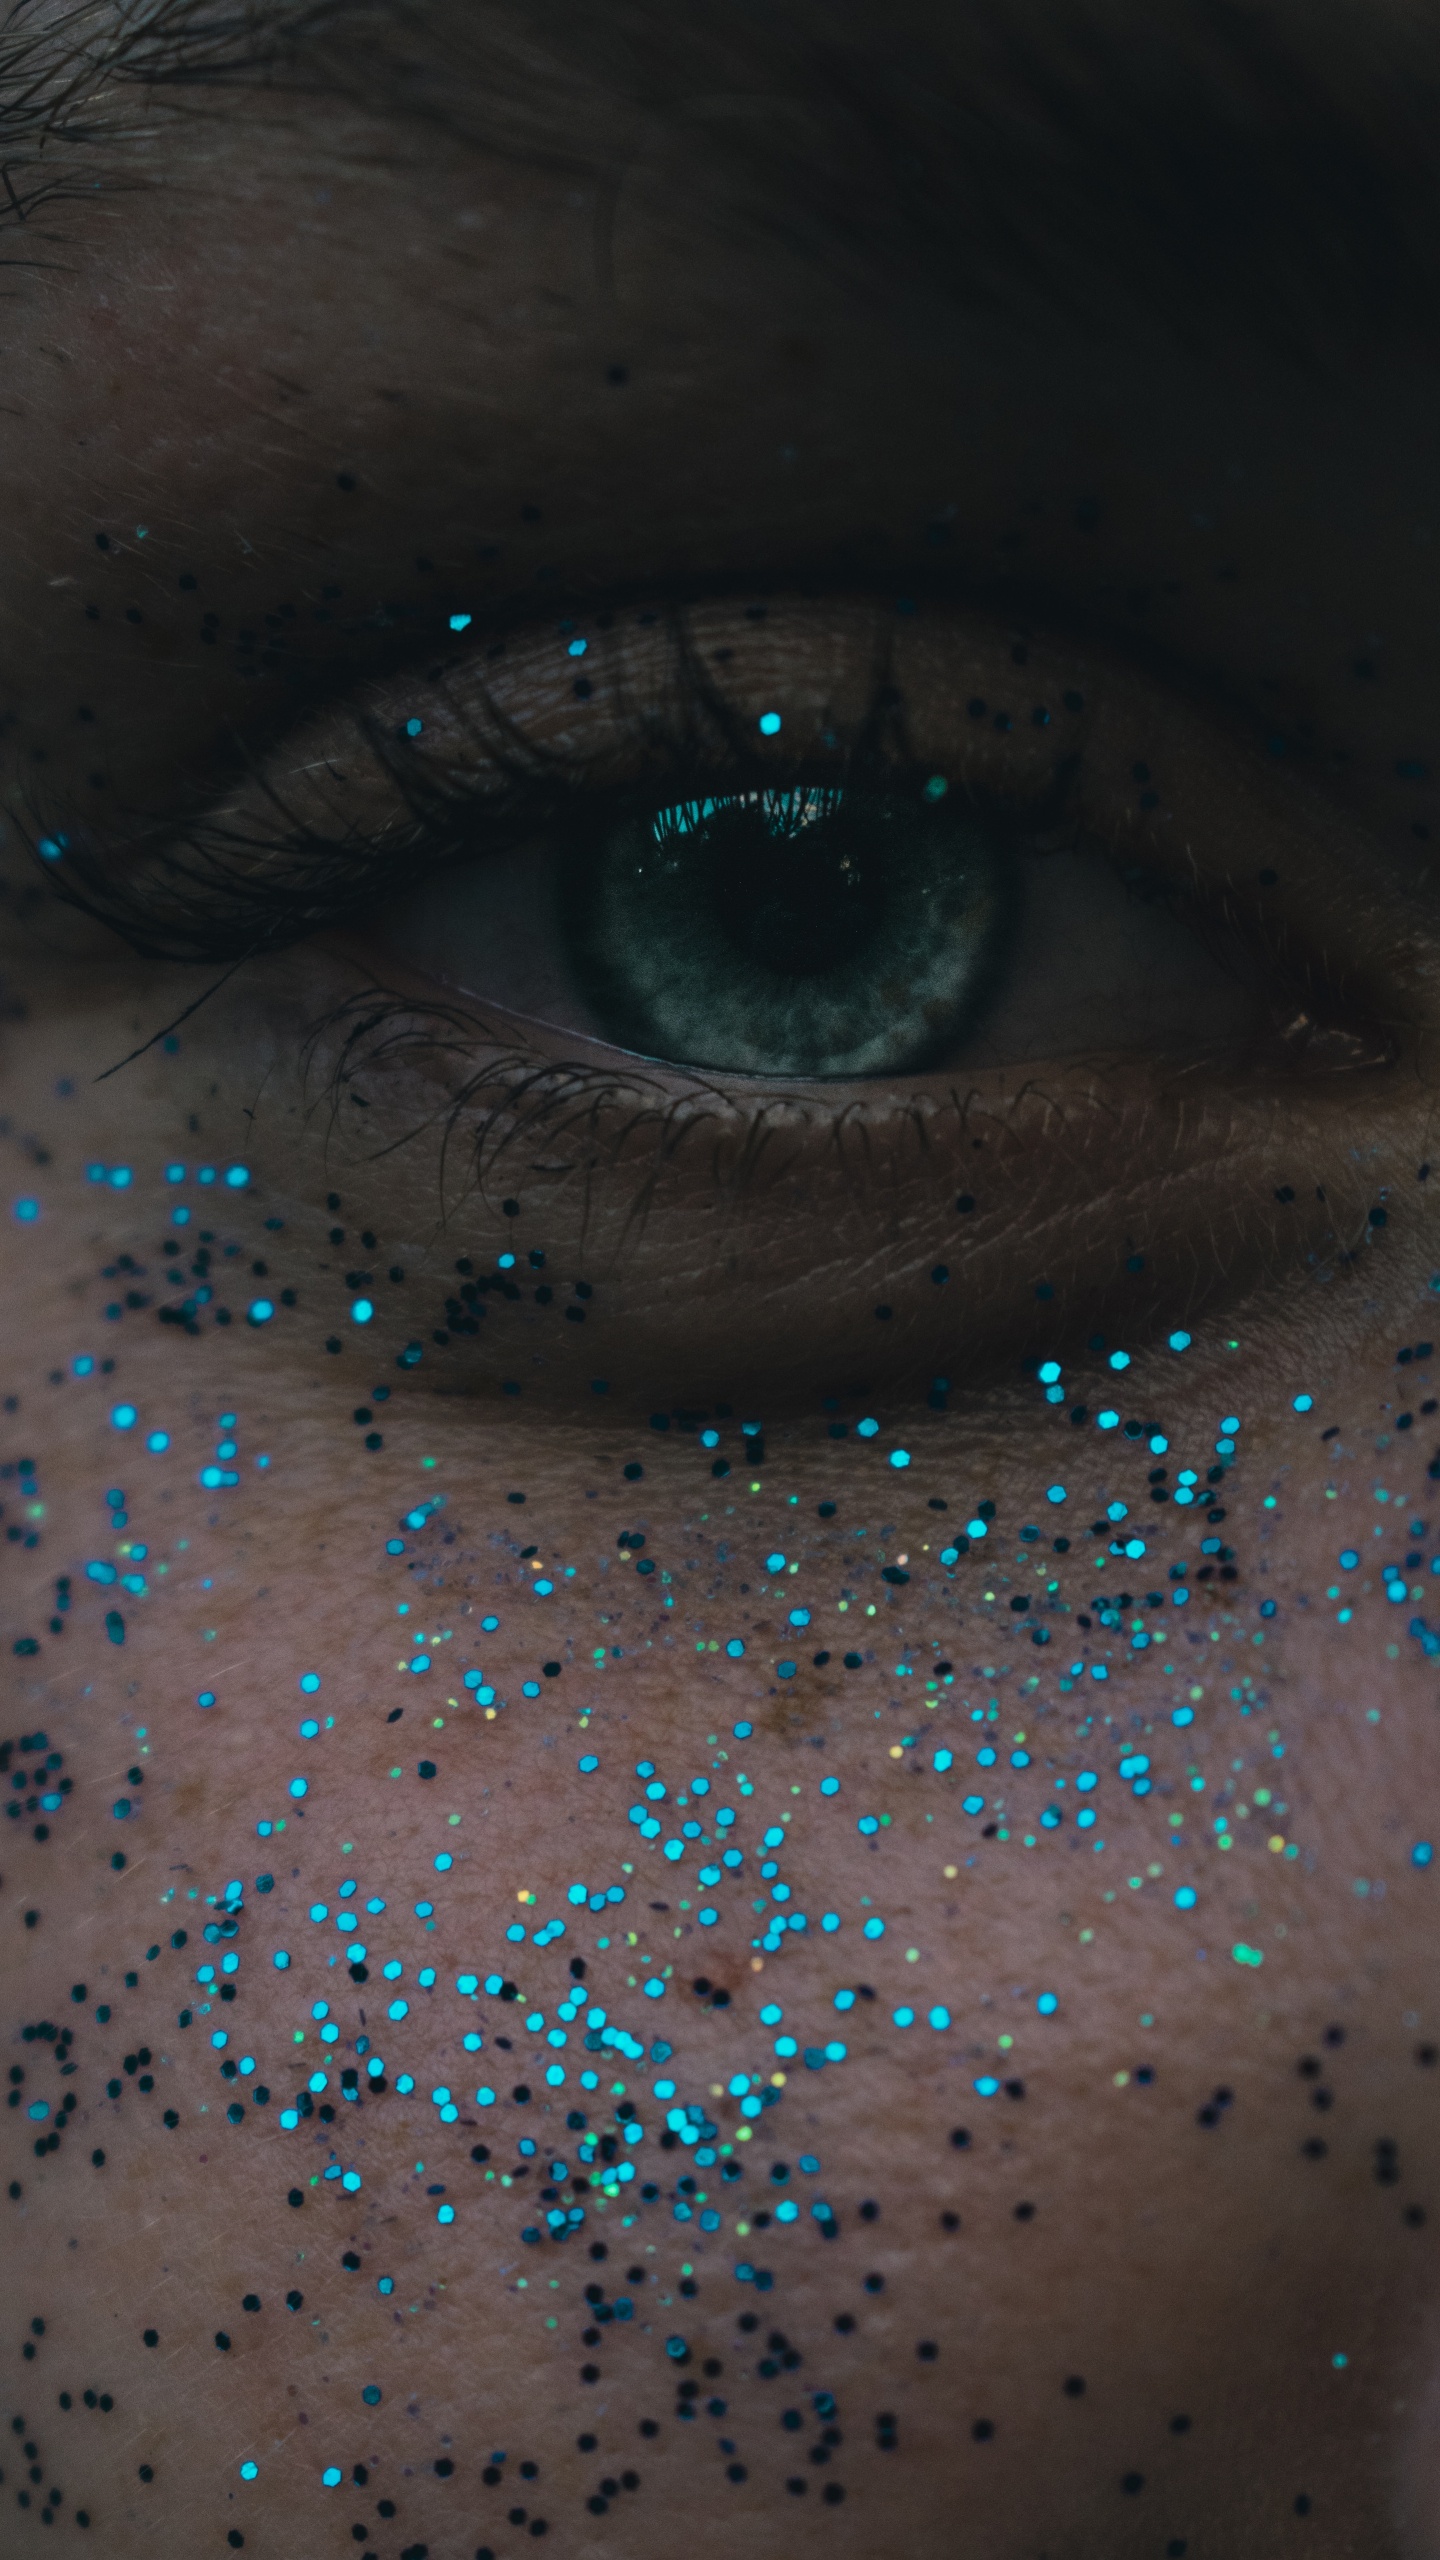 Persons Eye With Blue Eyes. Wallpaper in 1440x2560 Resolution